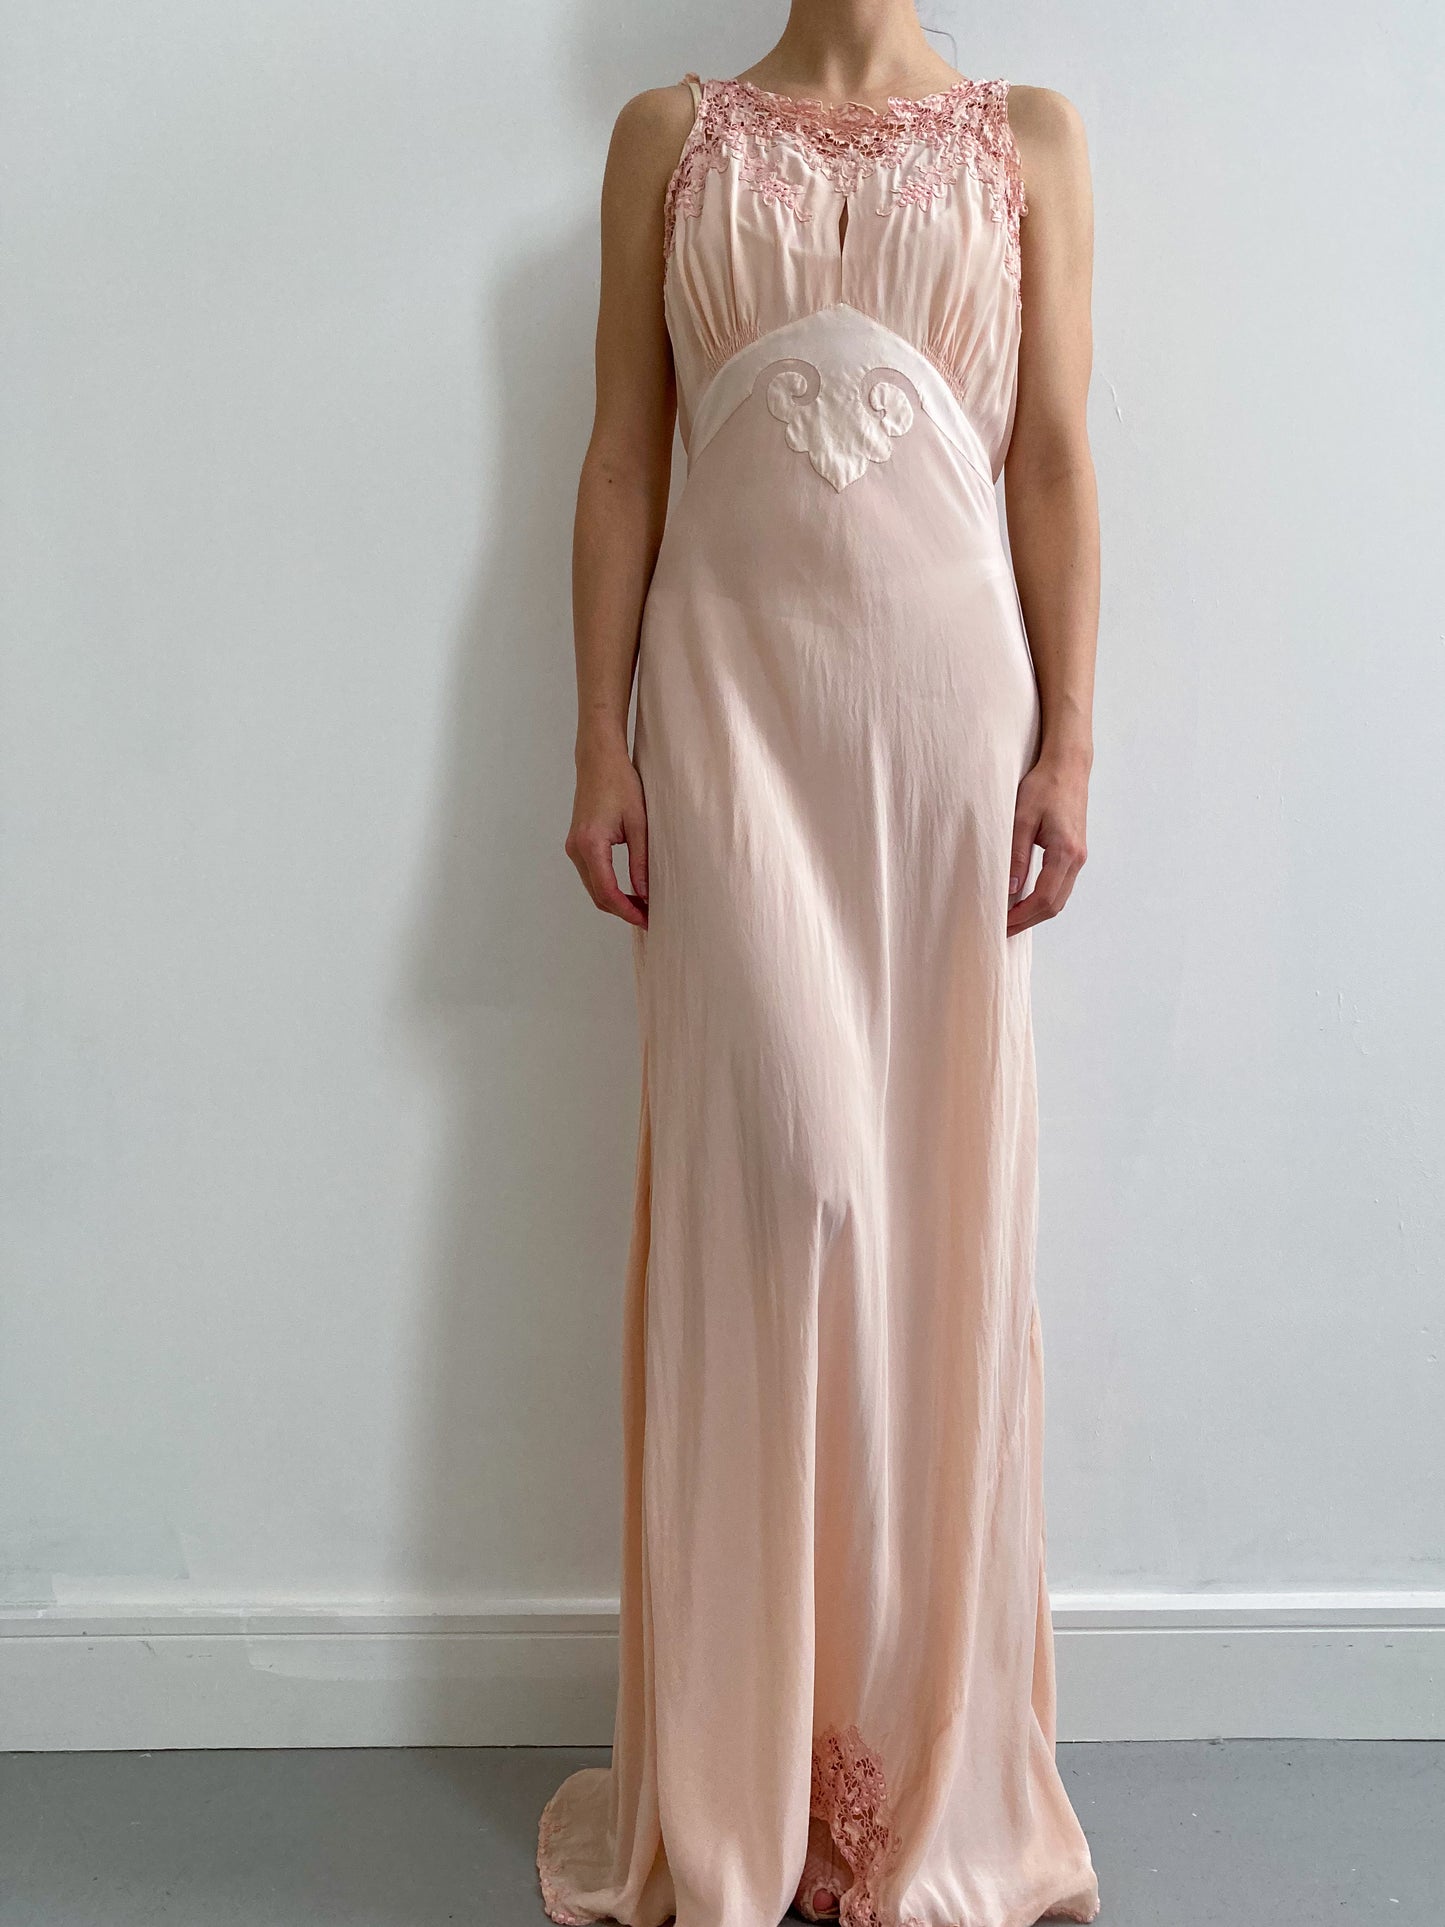 1930s Pink Silk Slip Gown with Tie Straps & Intricate Embroidery Size S/M